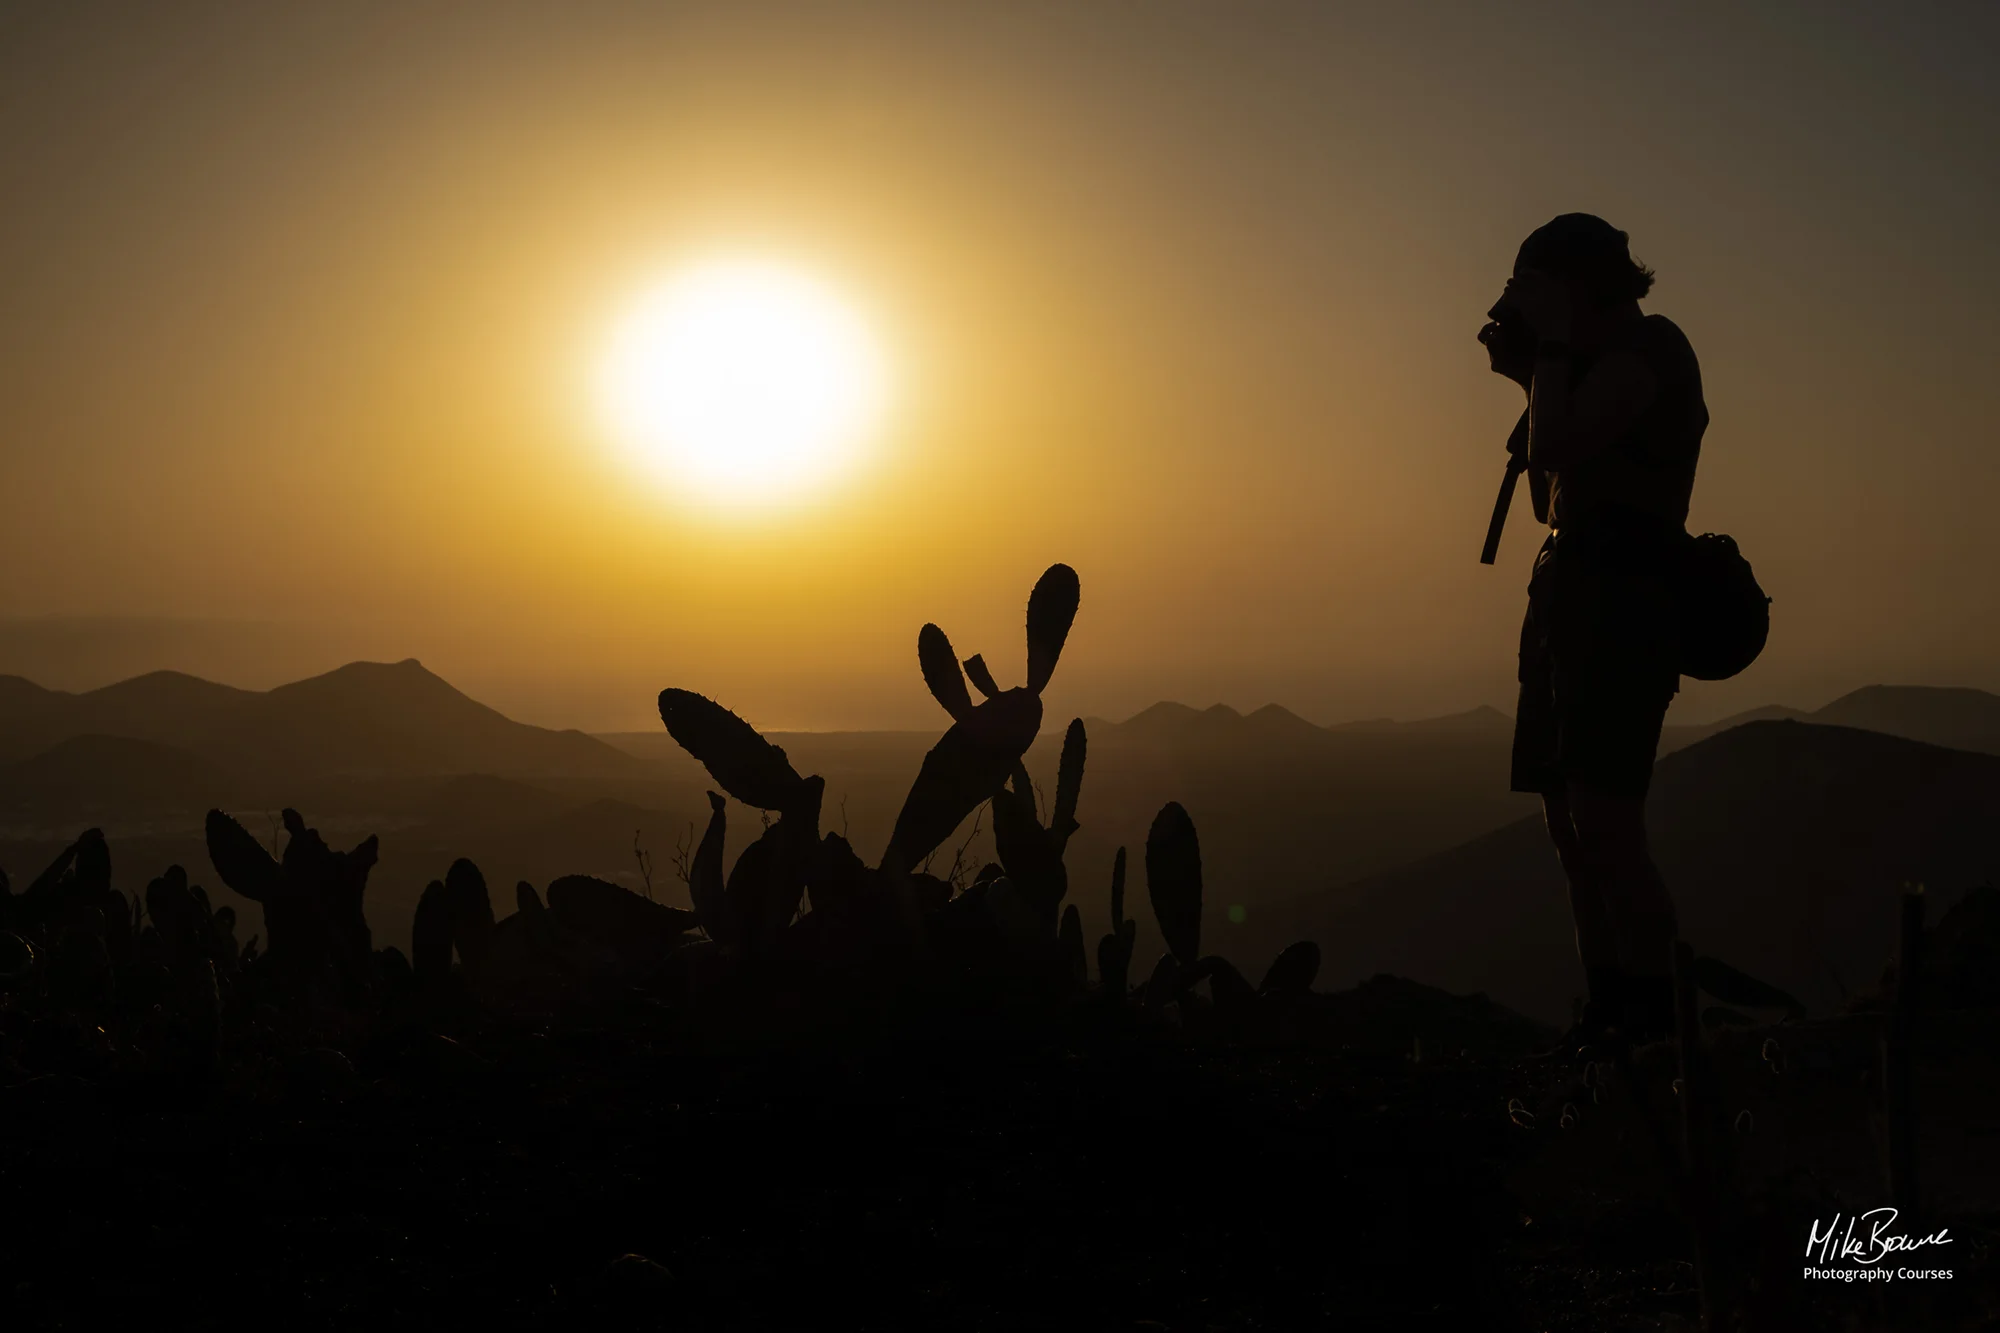 Woman surrounded by cactuses photographing sunset in mountains on Lanzarote